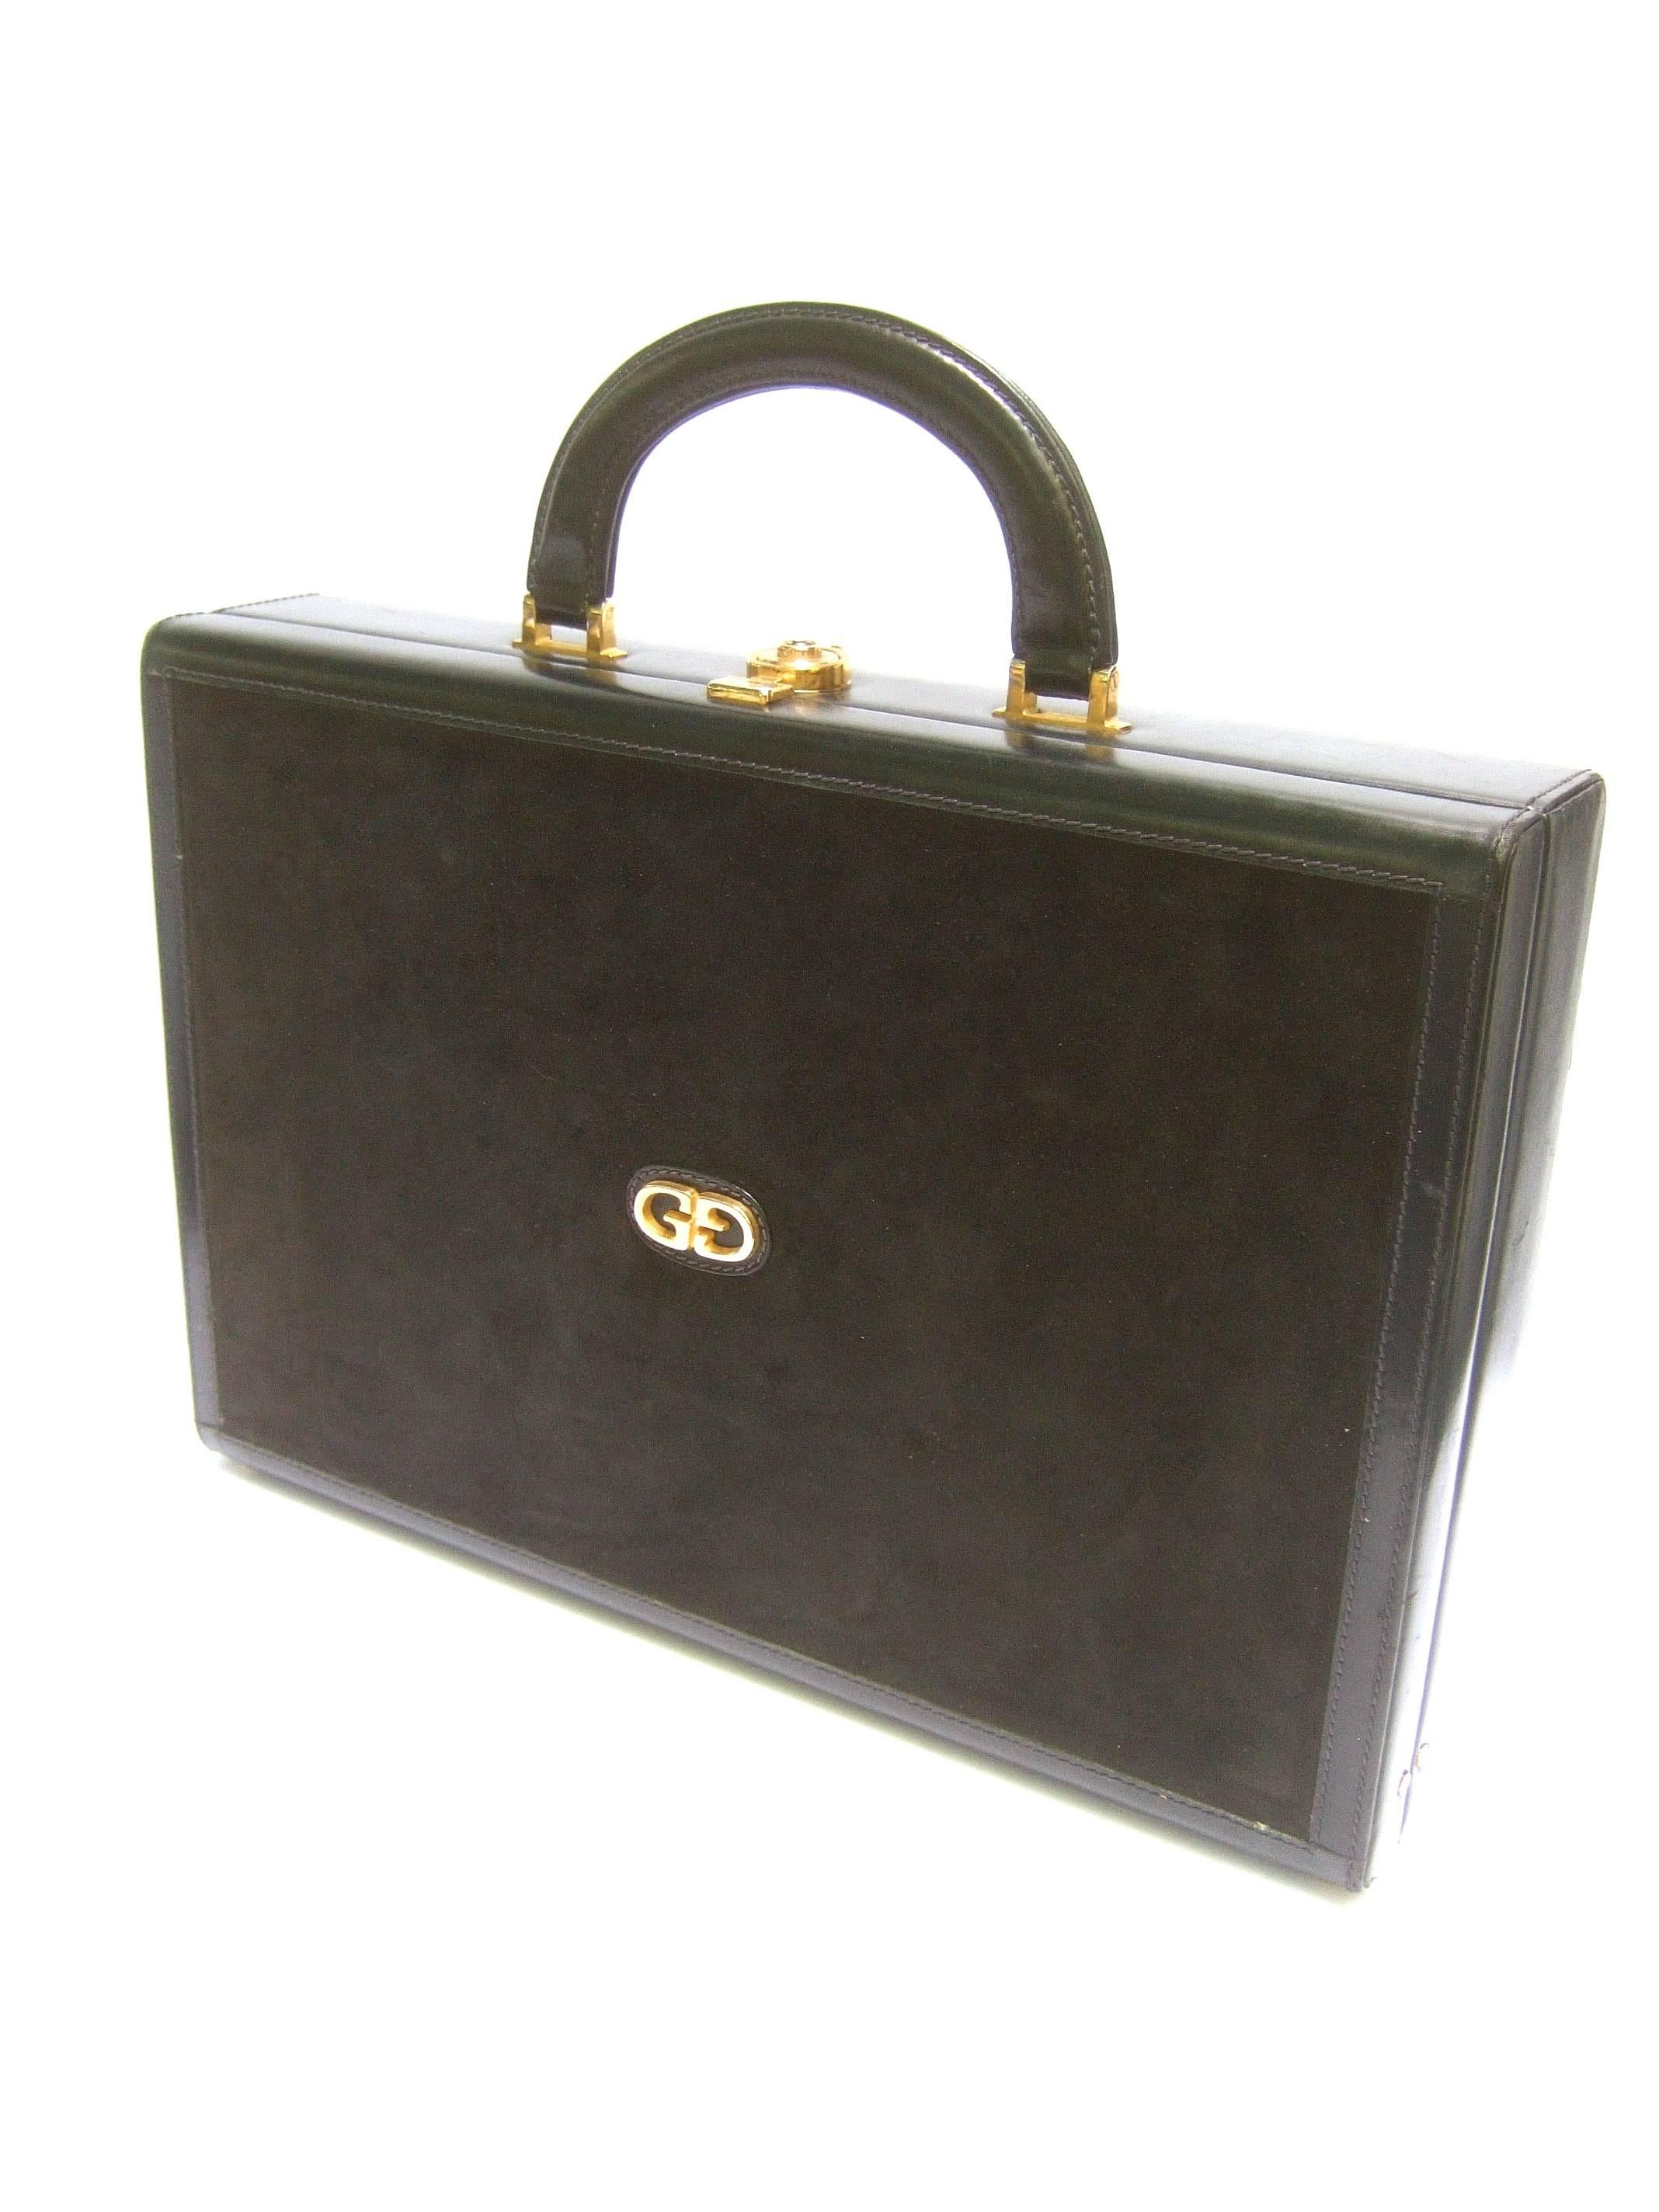 Gucci Luxurious Black Suede & Leather Briefcase circa 1970s 11